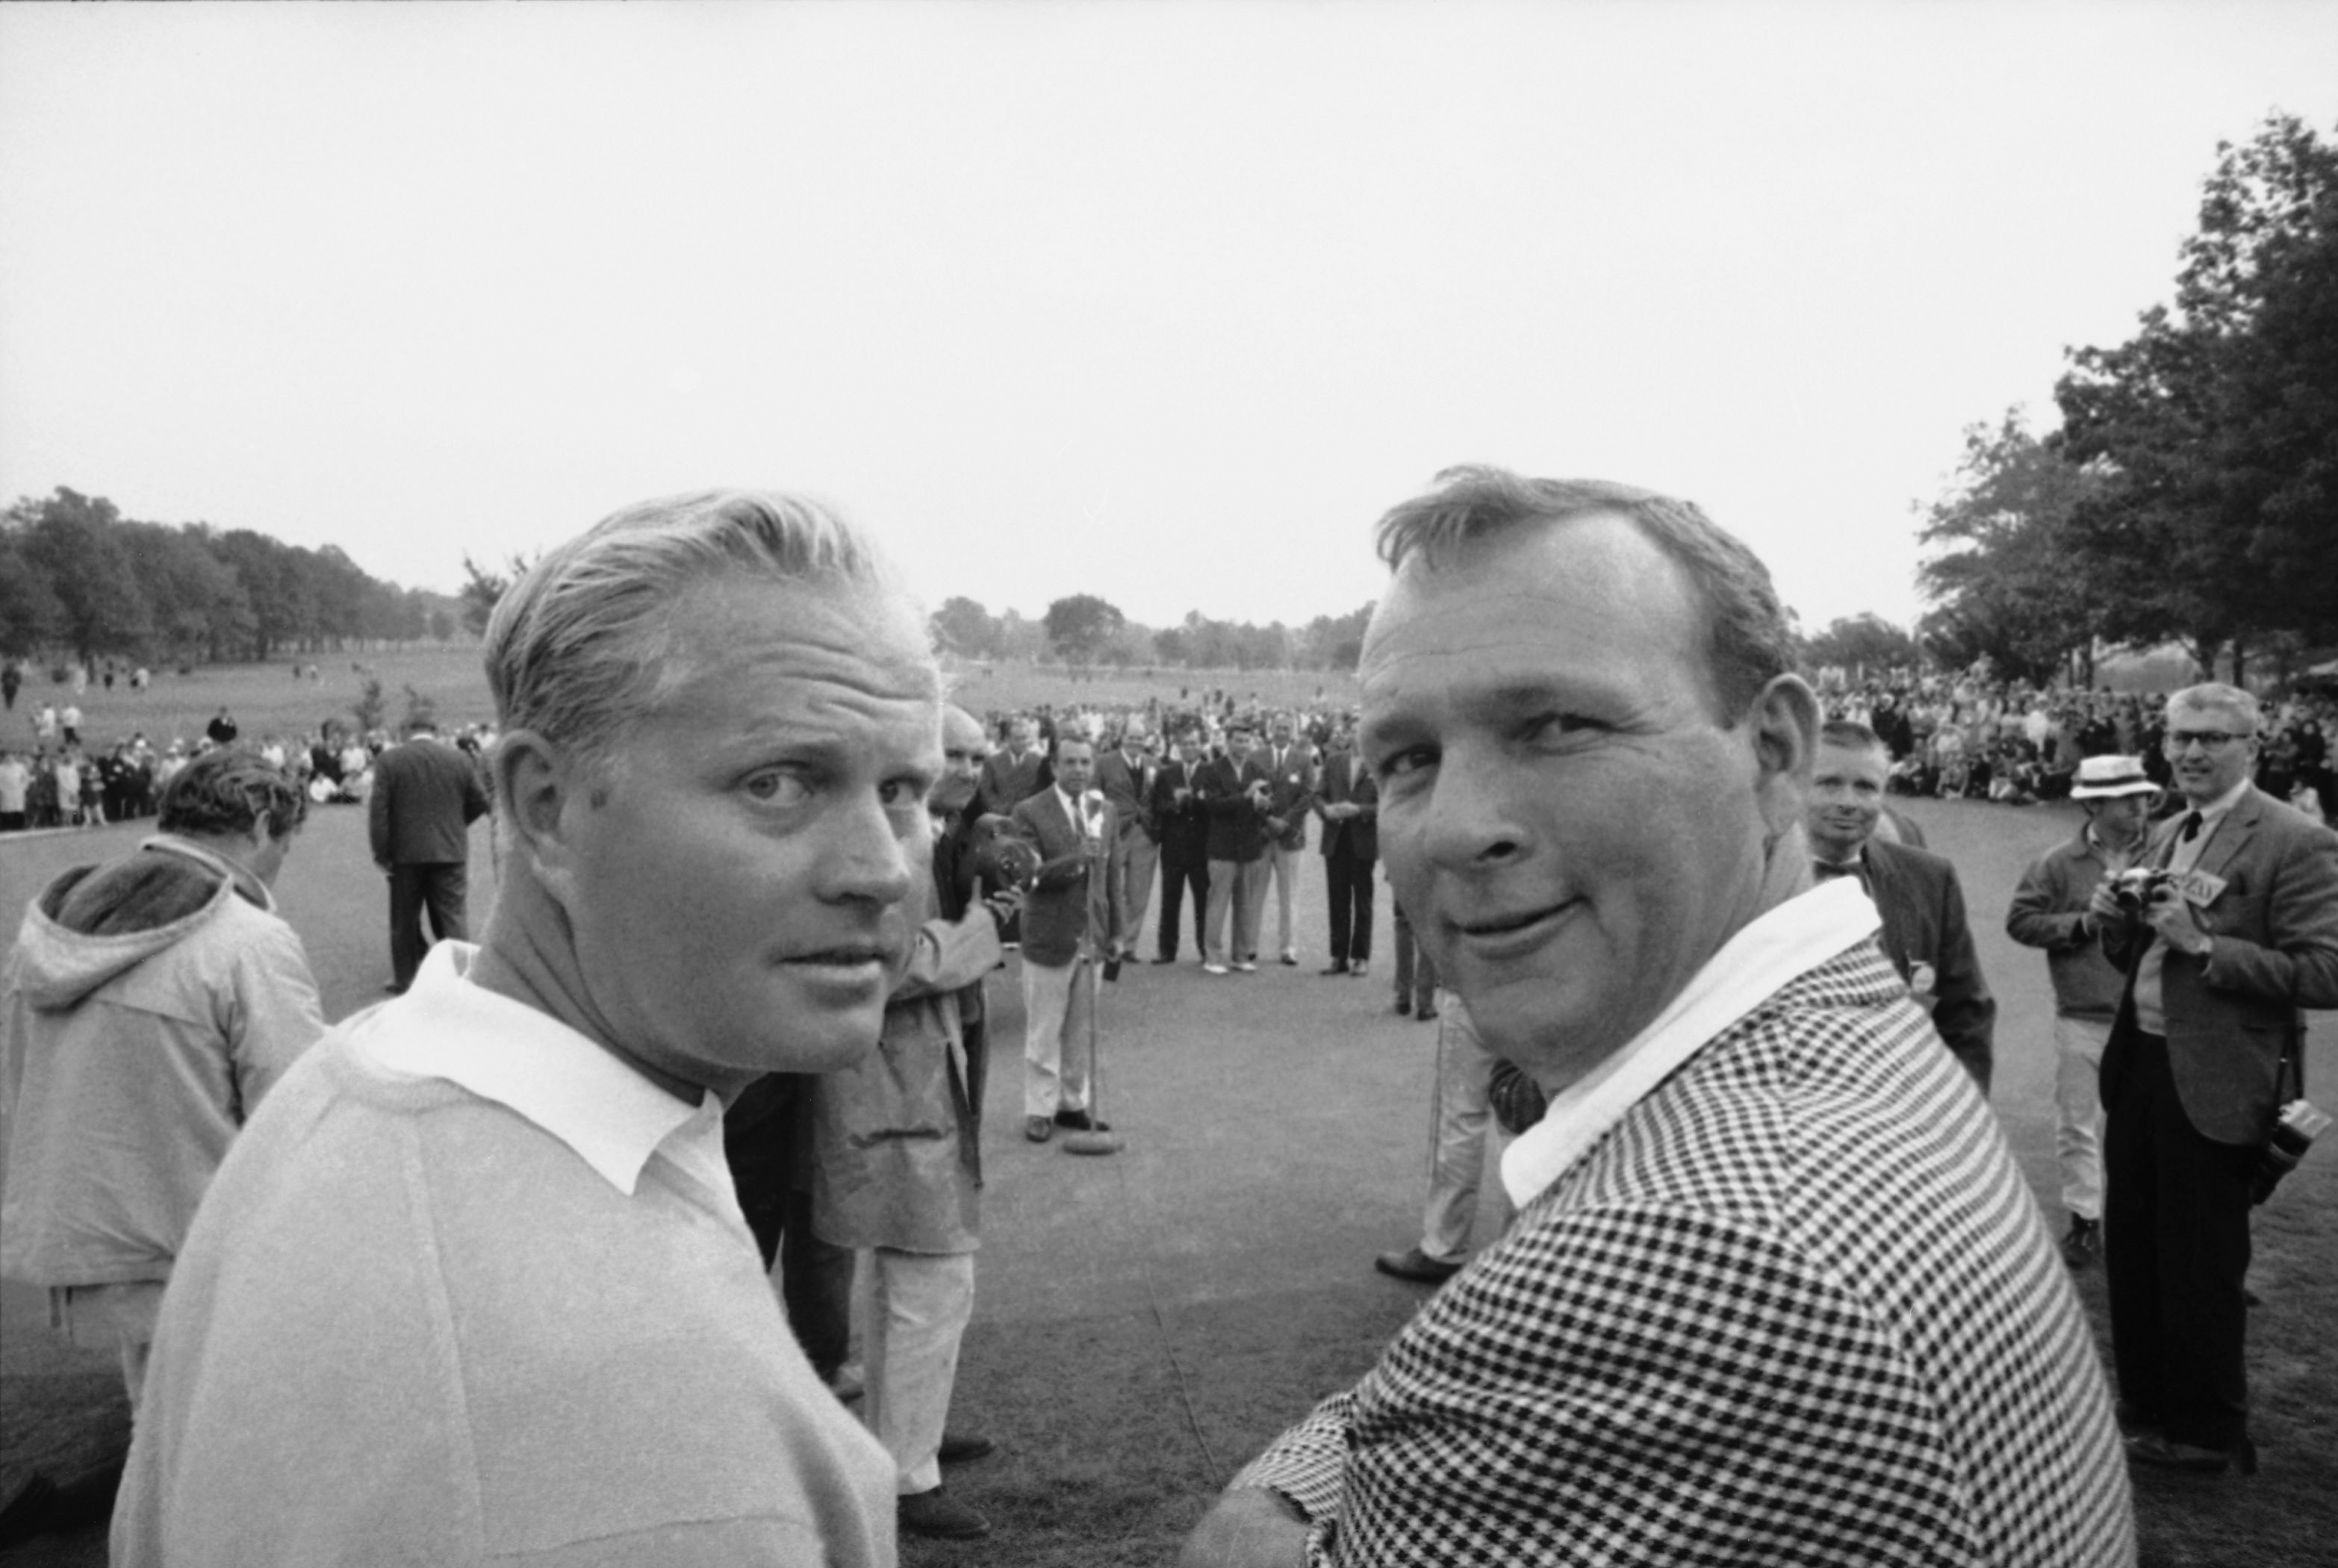 Thunderbird Golf Classic winner Arnold Palmer, right, and runner-up Jack Nicklaus stop for a backward look at photographers before meeting the rest of the press after the tournament in Clifton, N.J., on Sept. 25, 1967.